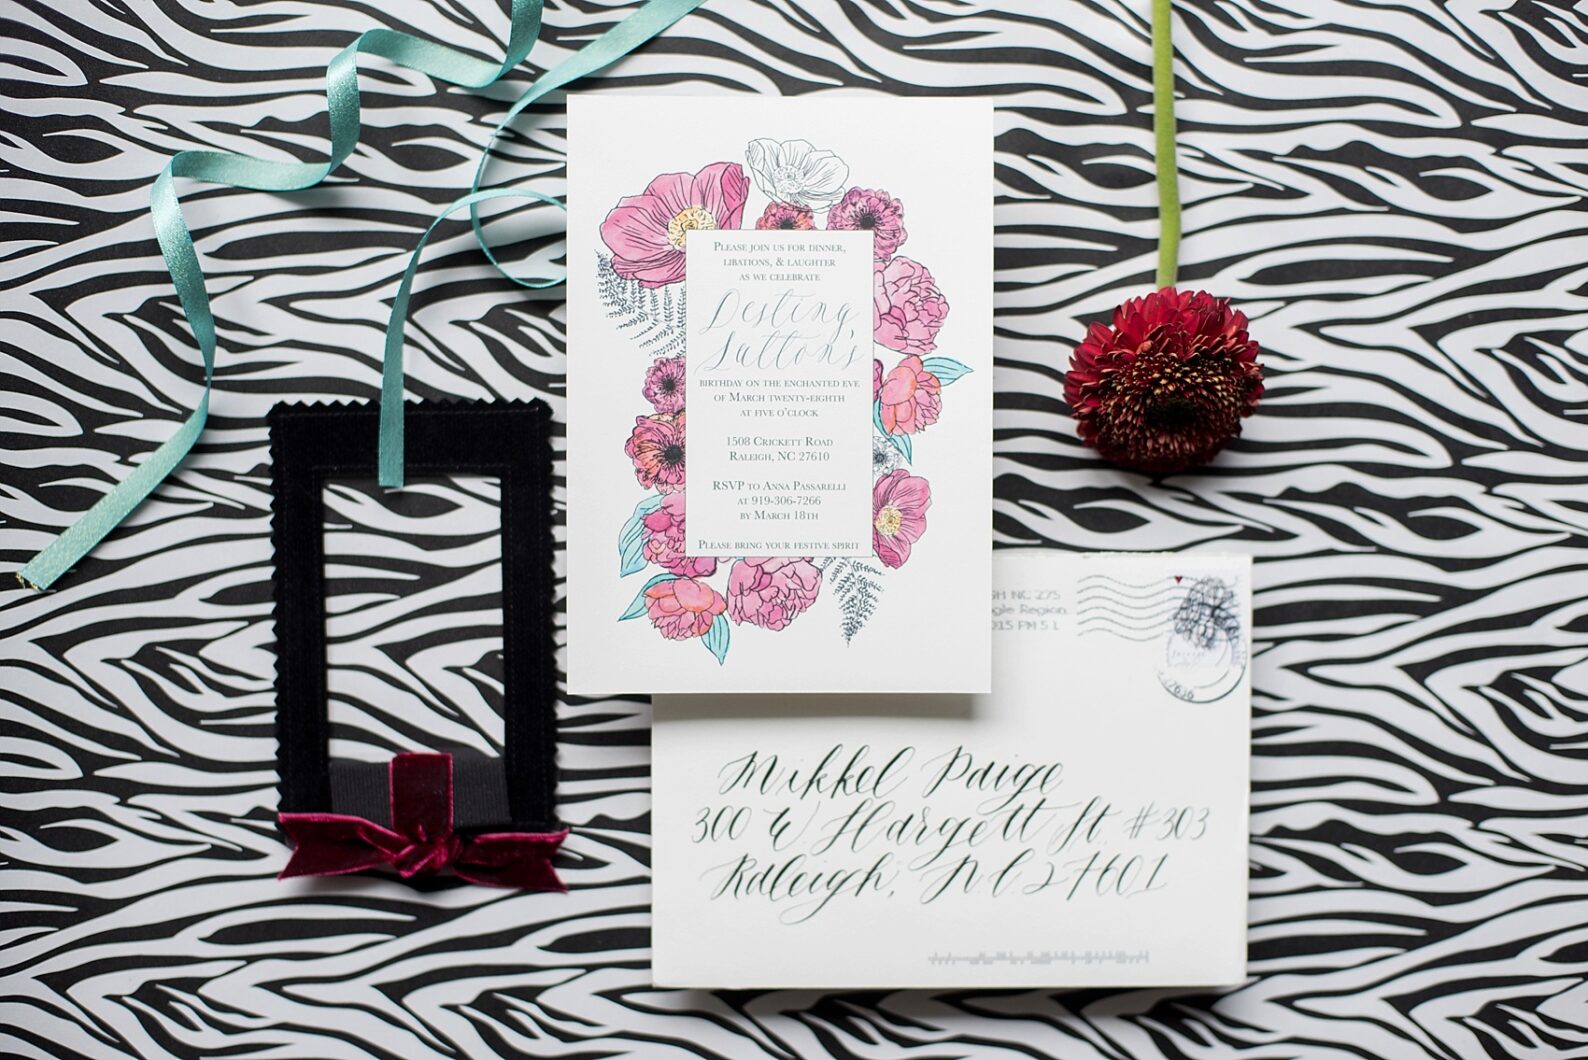 Custom floral birthday invitation. Photo by Raleigh wedding photographer Mikkel Paige, calligraphy and design by One and Only.